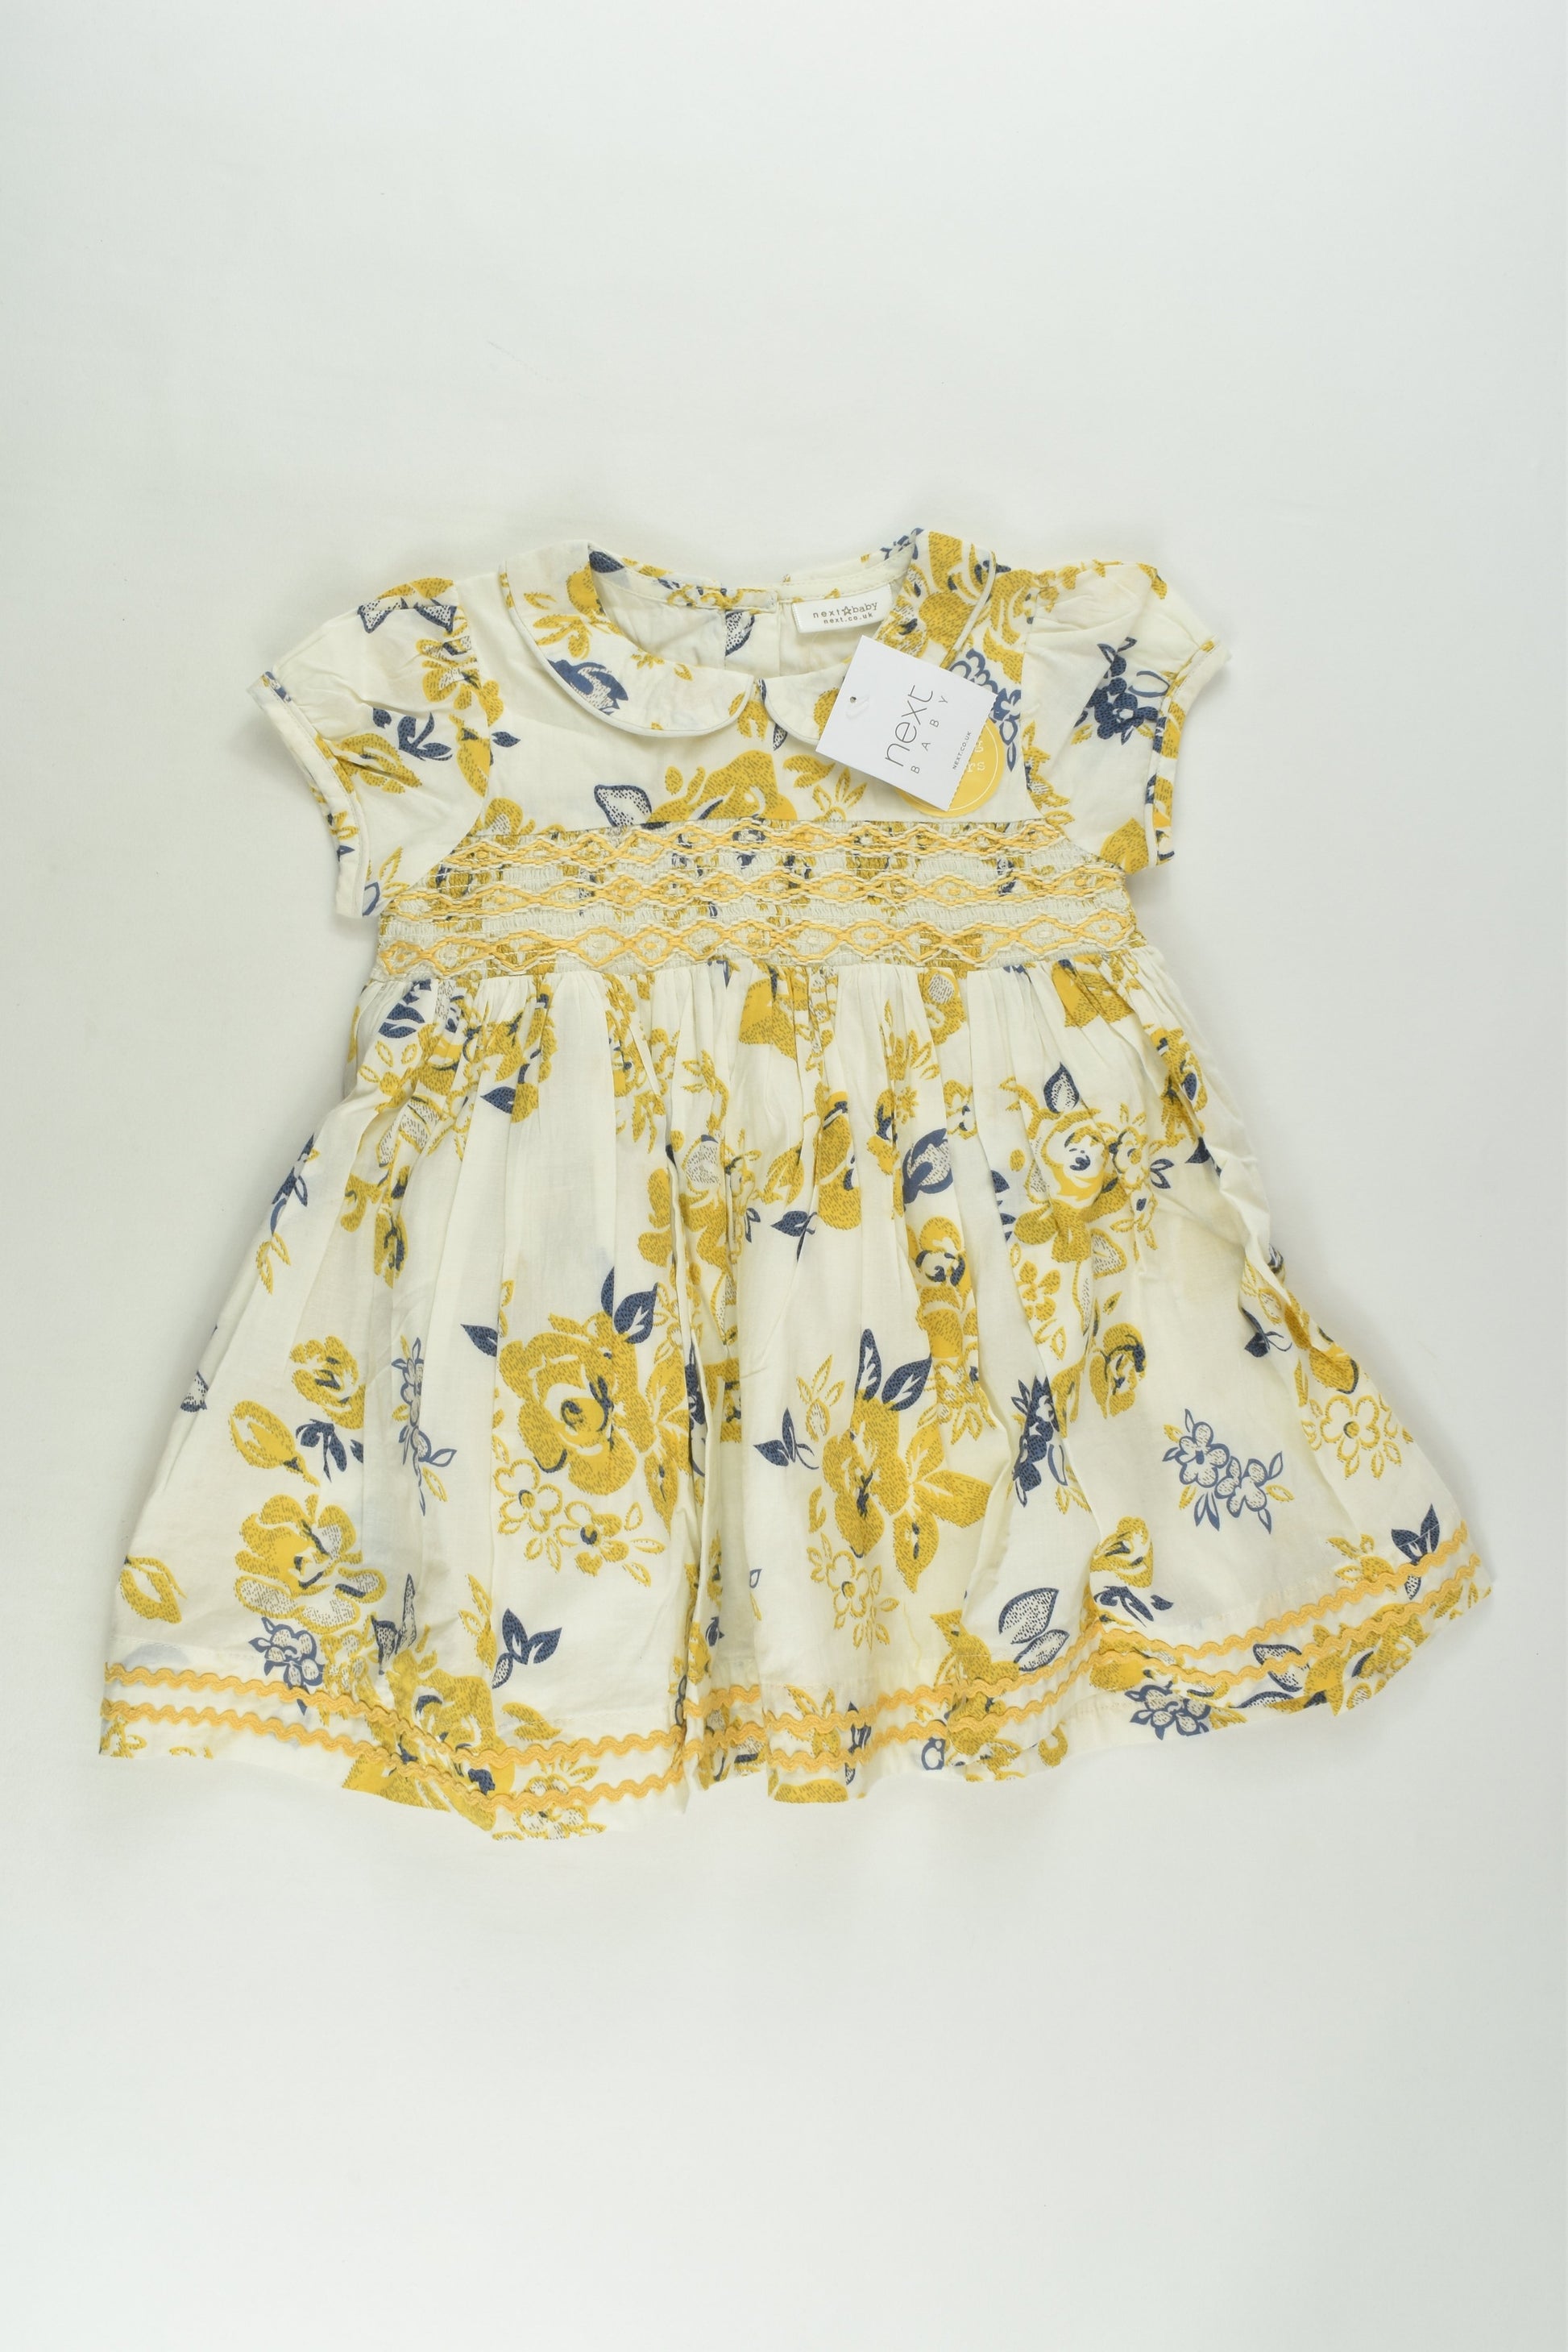 NEW Next Size 0 (6-9 months) Lined Smocked Dress with Bloomers